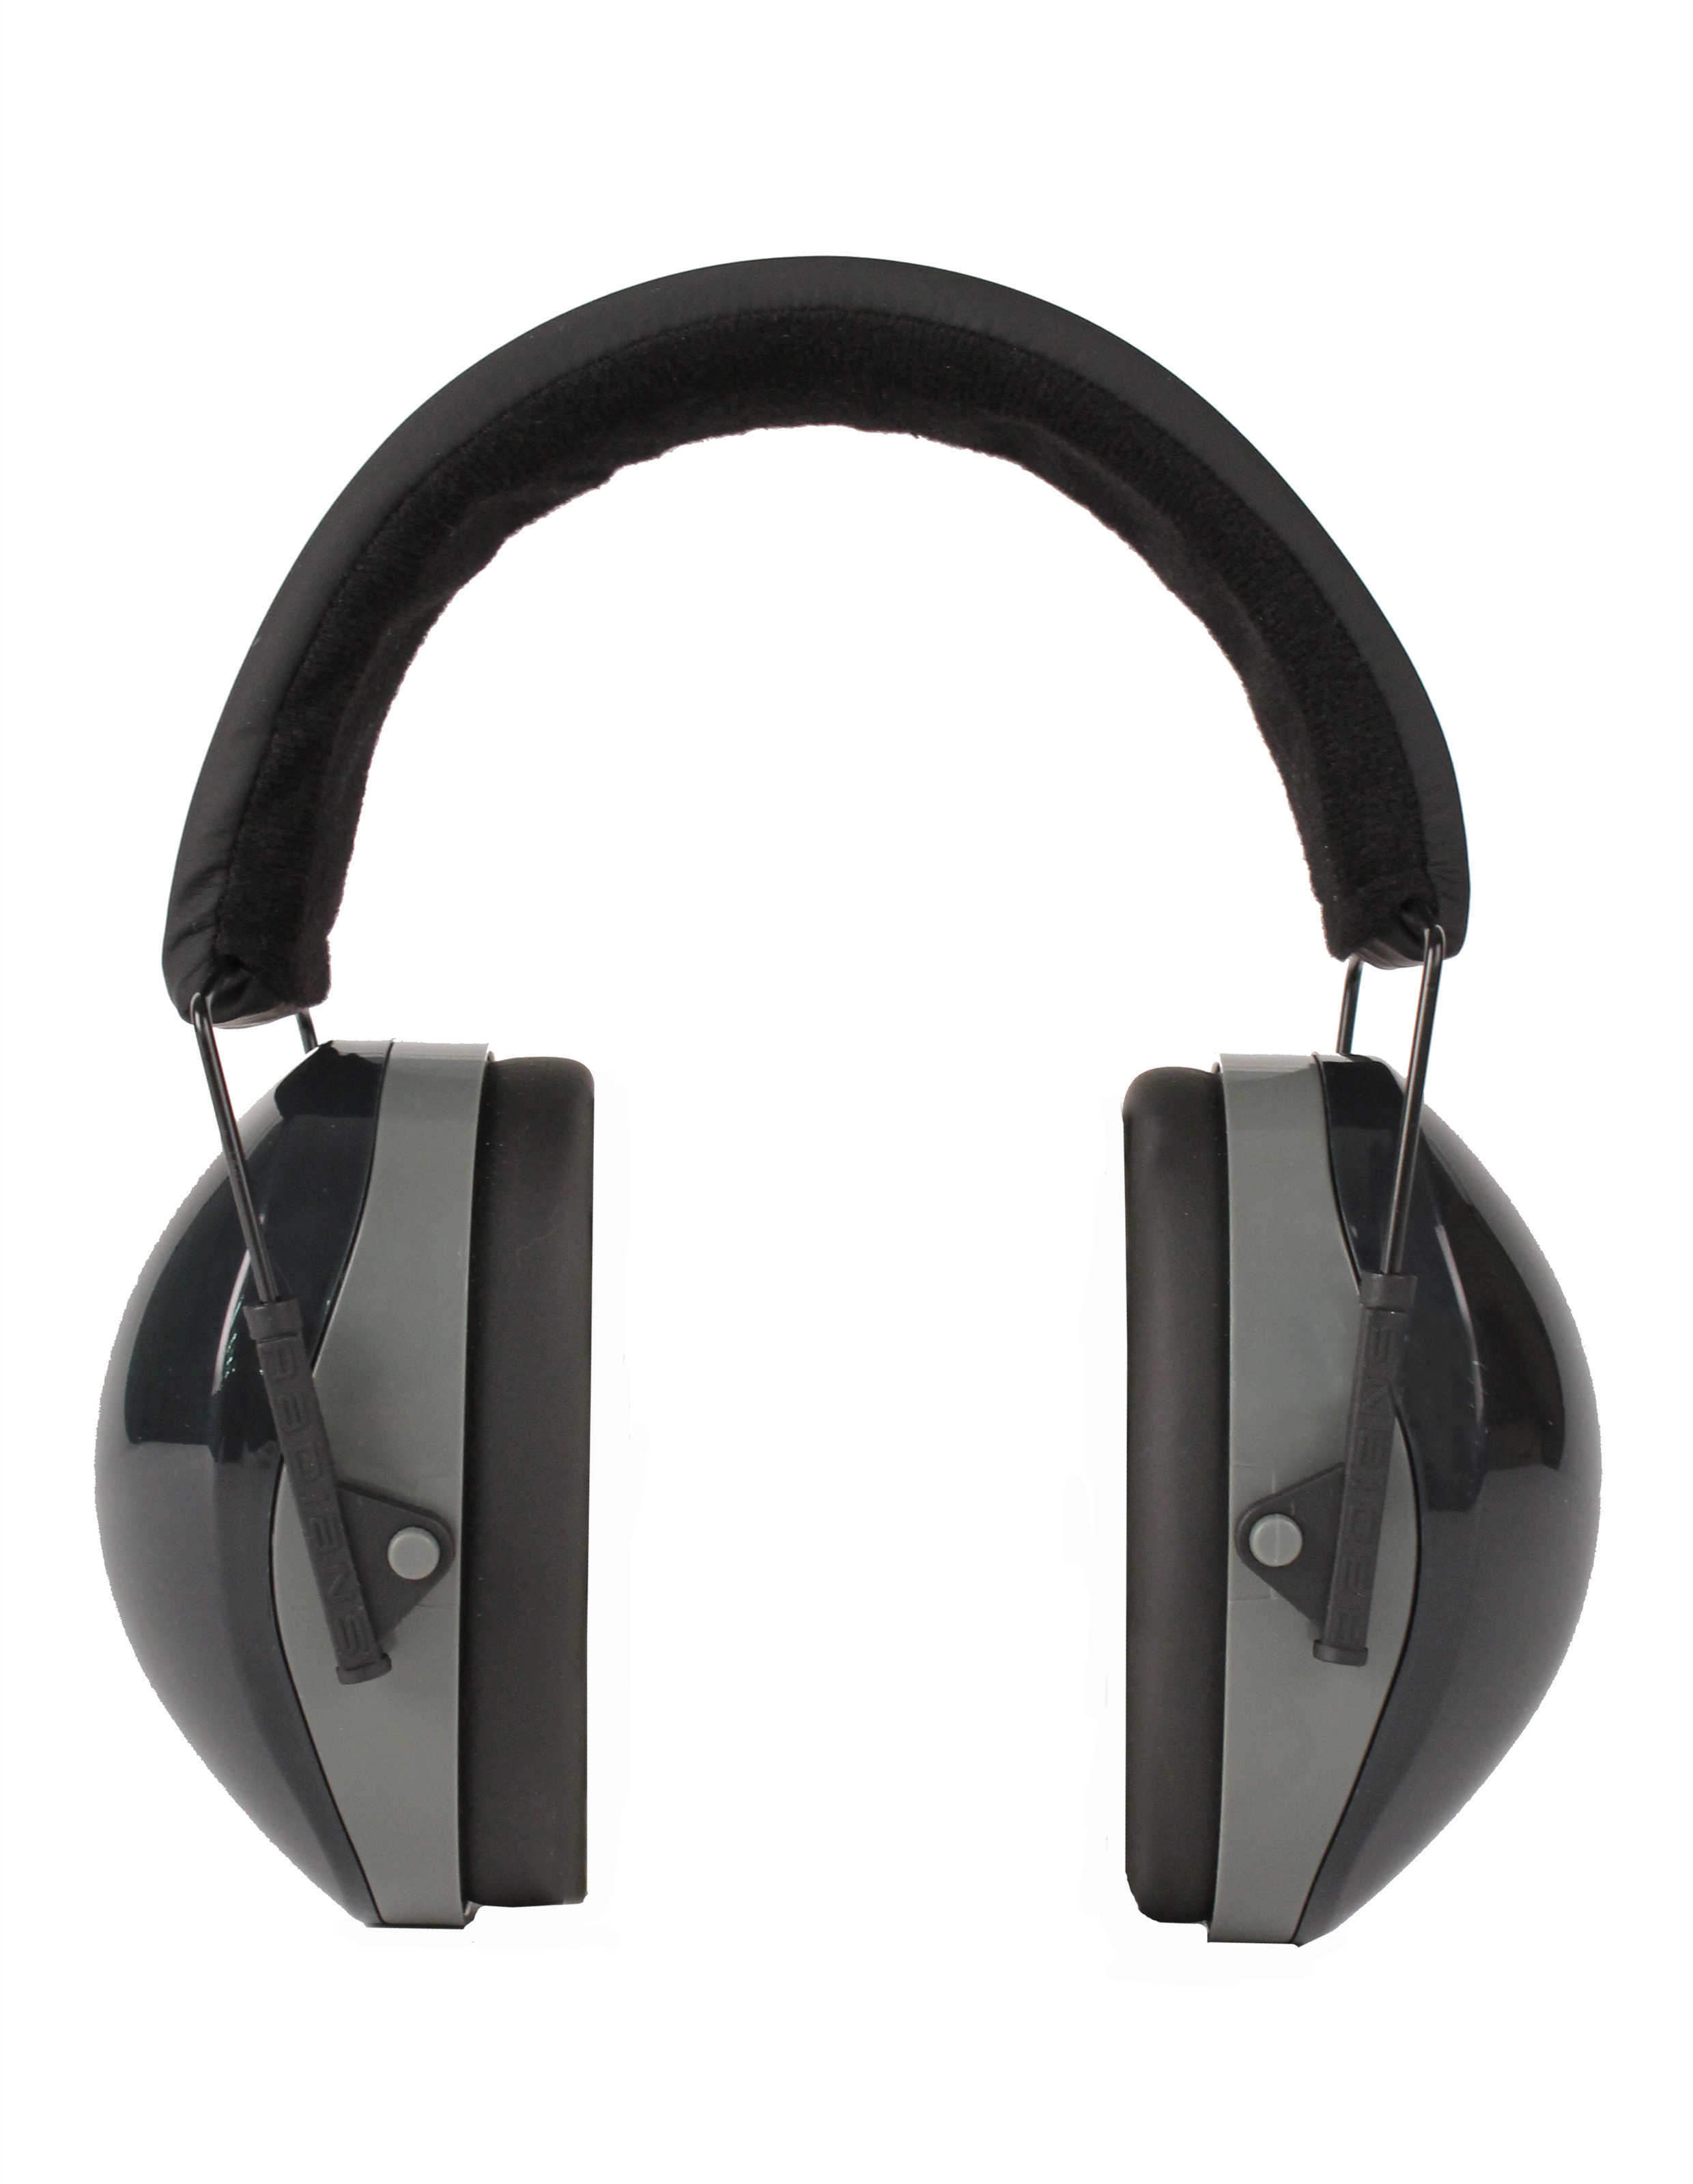 Terminator Hearing Protection Black NRR 29Db - Compact Folding For Easy Storage - CoolMax Adjustable Headband With Side